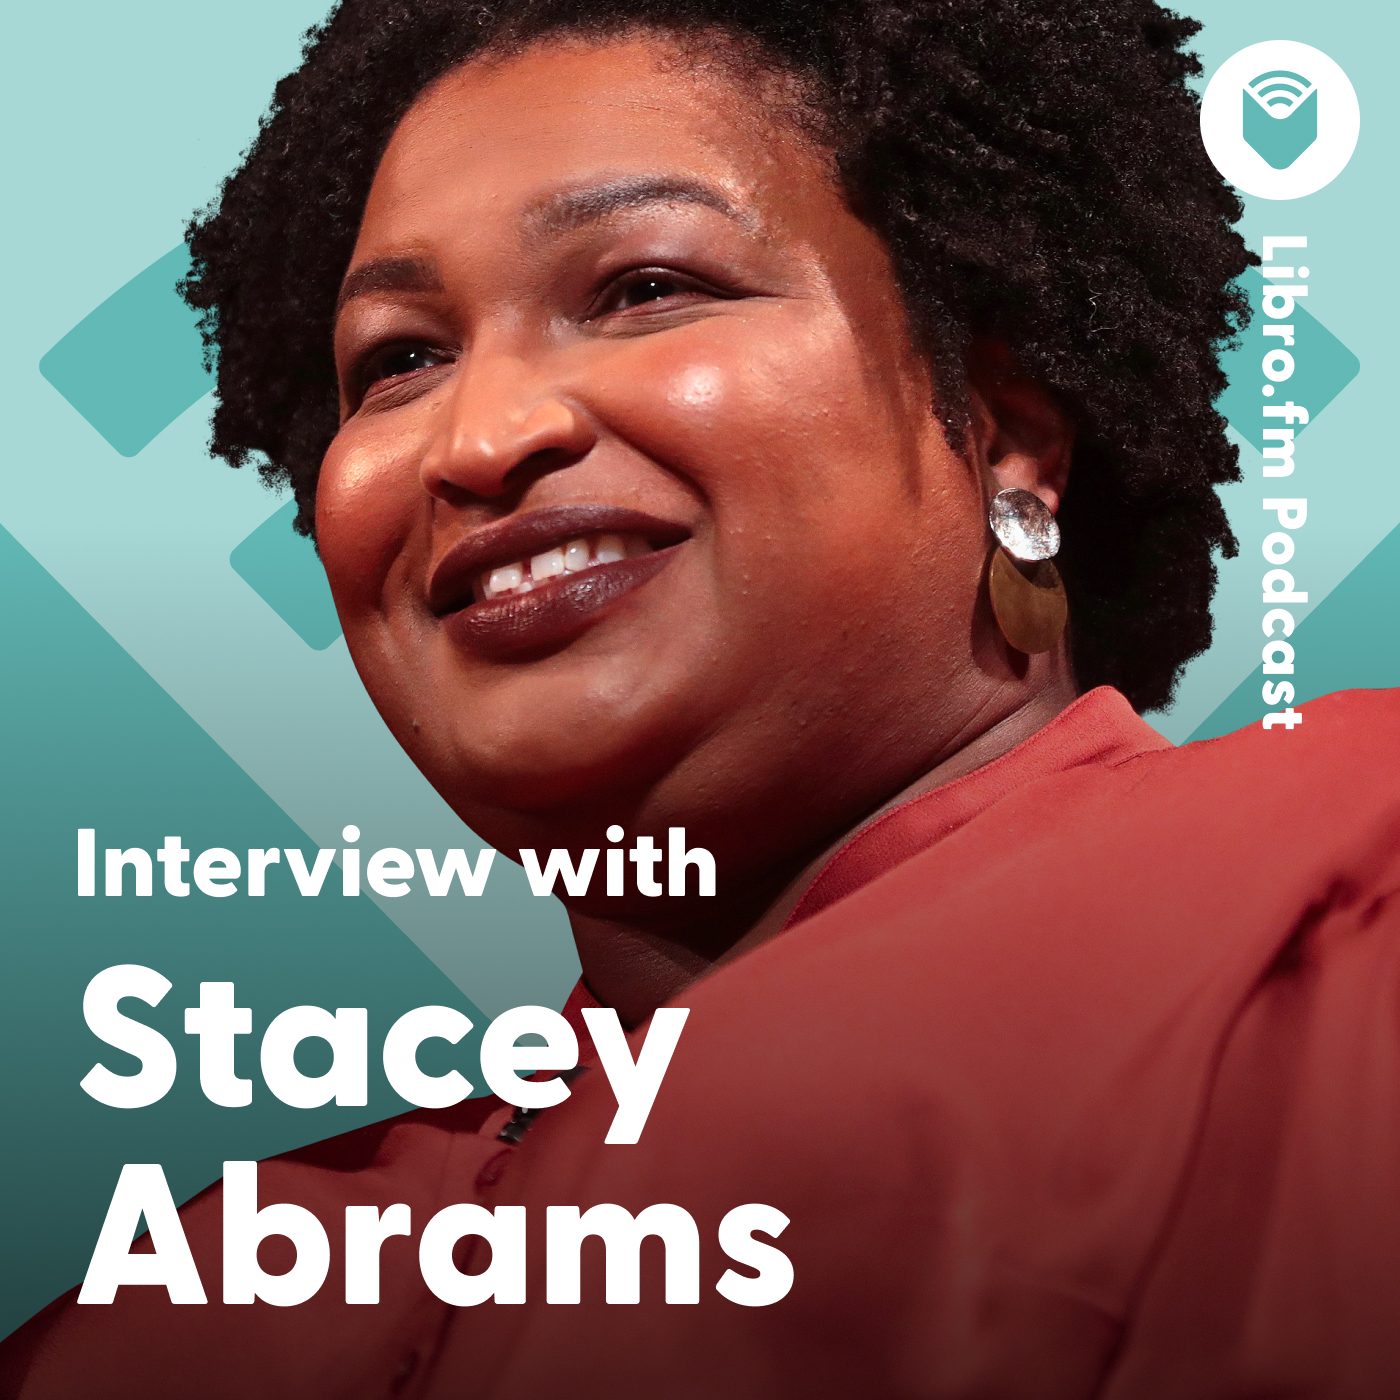 A headshot of Stacey Abrams on a teal background showing the Libro.fm logo. Text reads: “Libro.fm Podcast: Interview with Stacey Abrams.